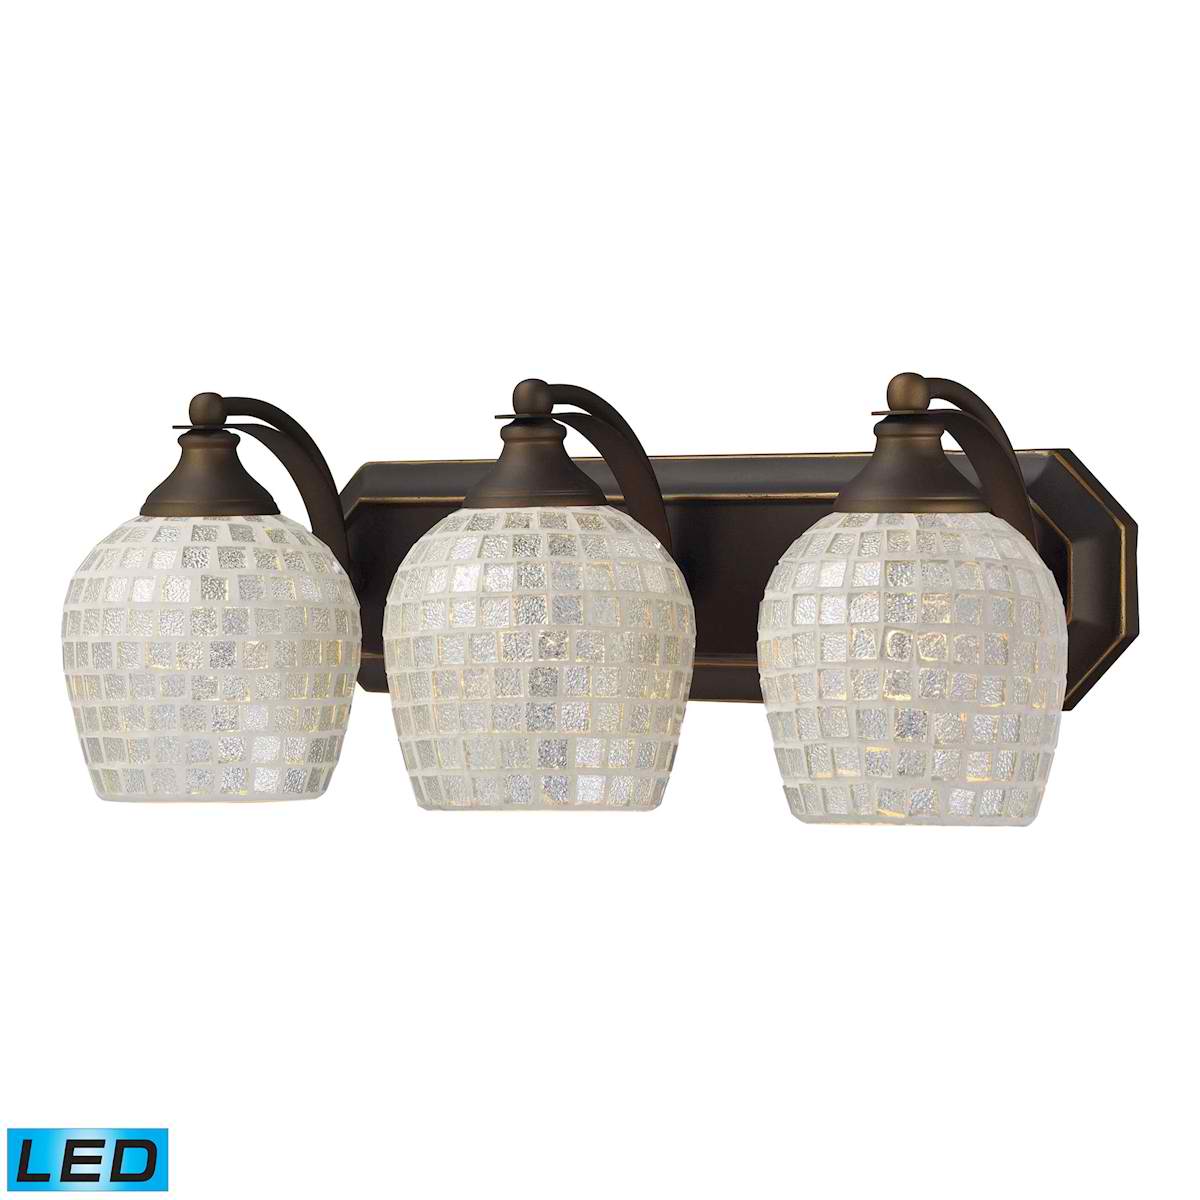 3 Light Vanity in Aged Bronze and Silver Mosaic Glass - LED, 800 Lumens (2400 Lumens Total) with Full Scale